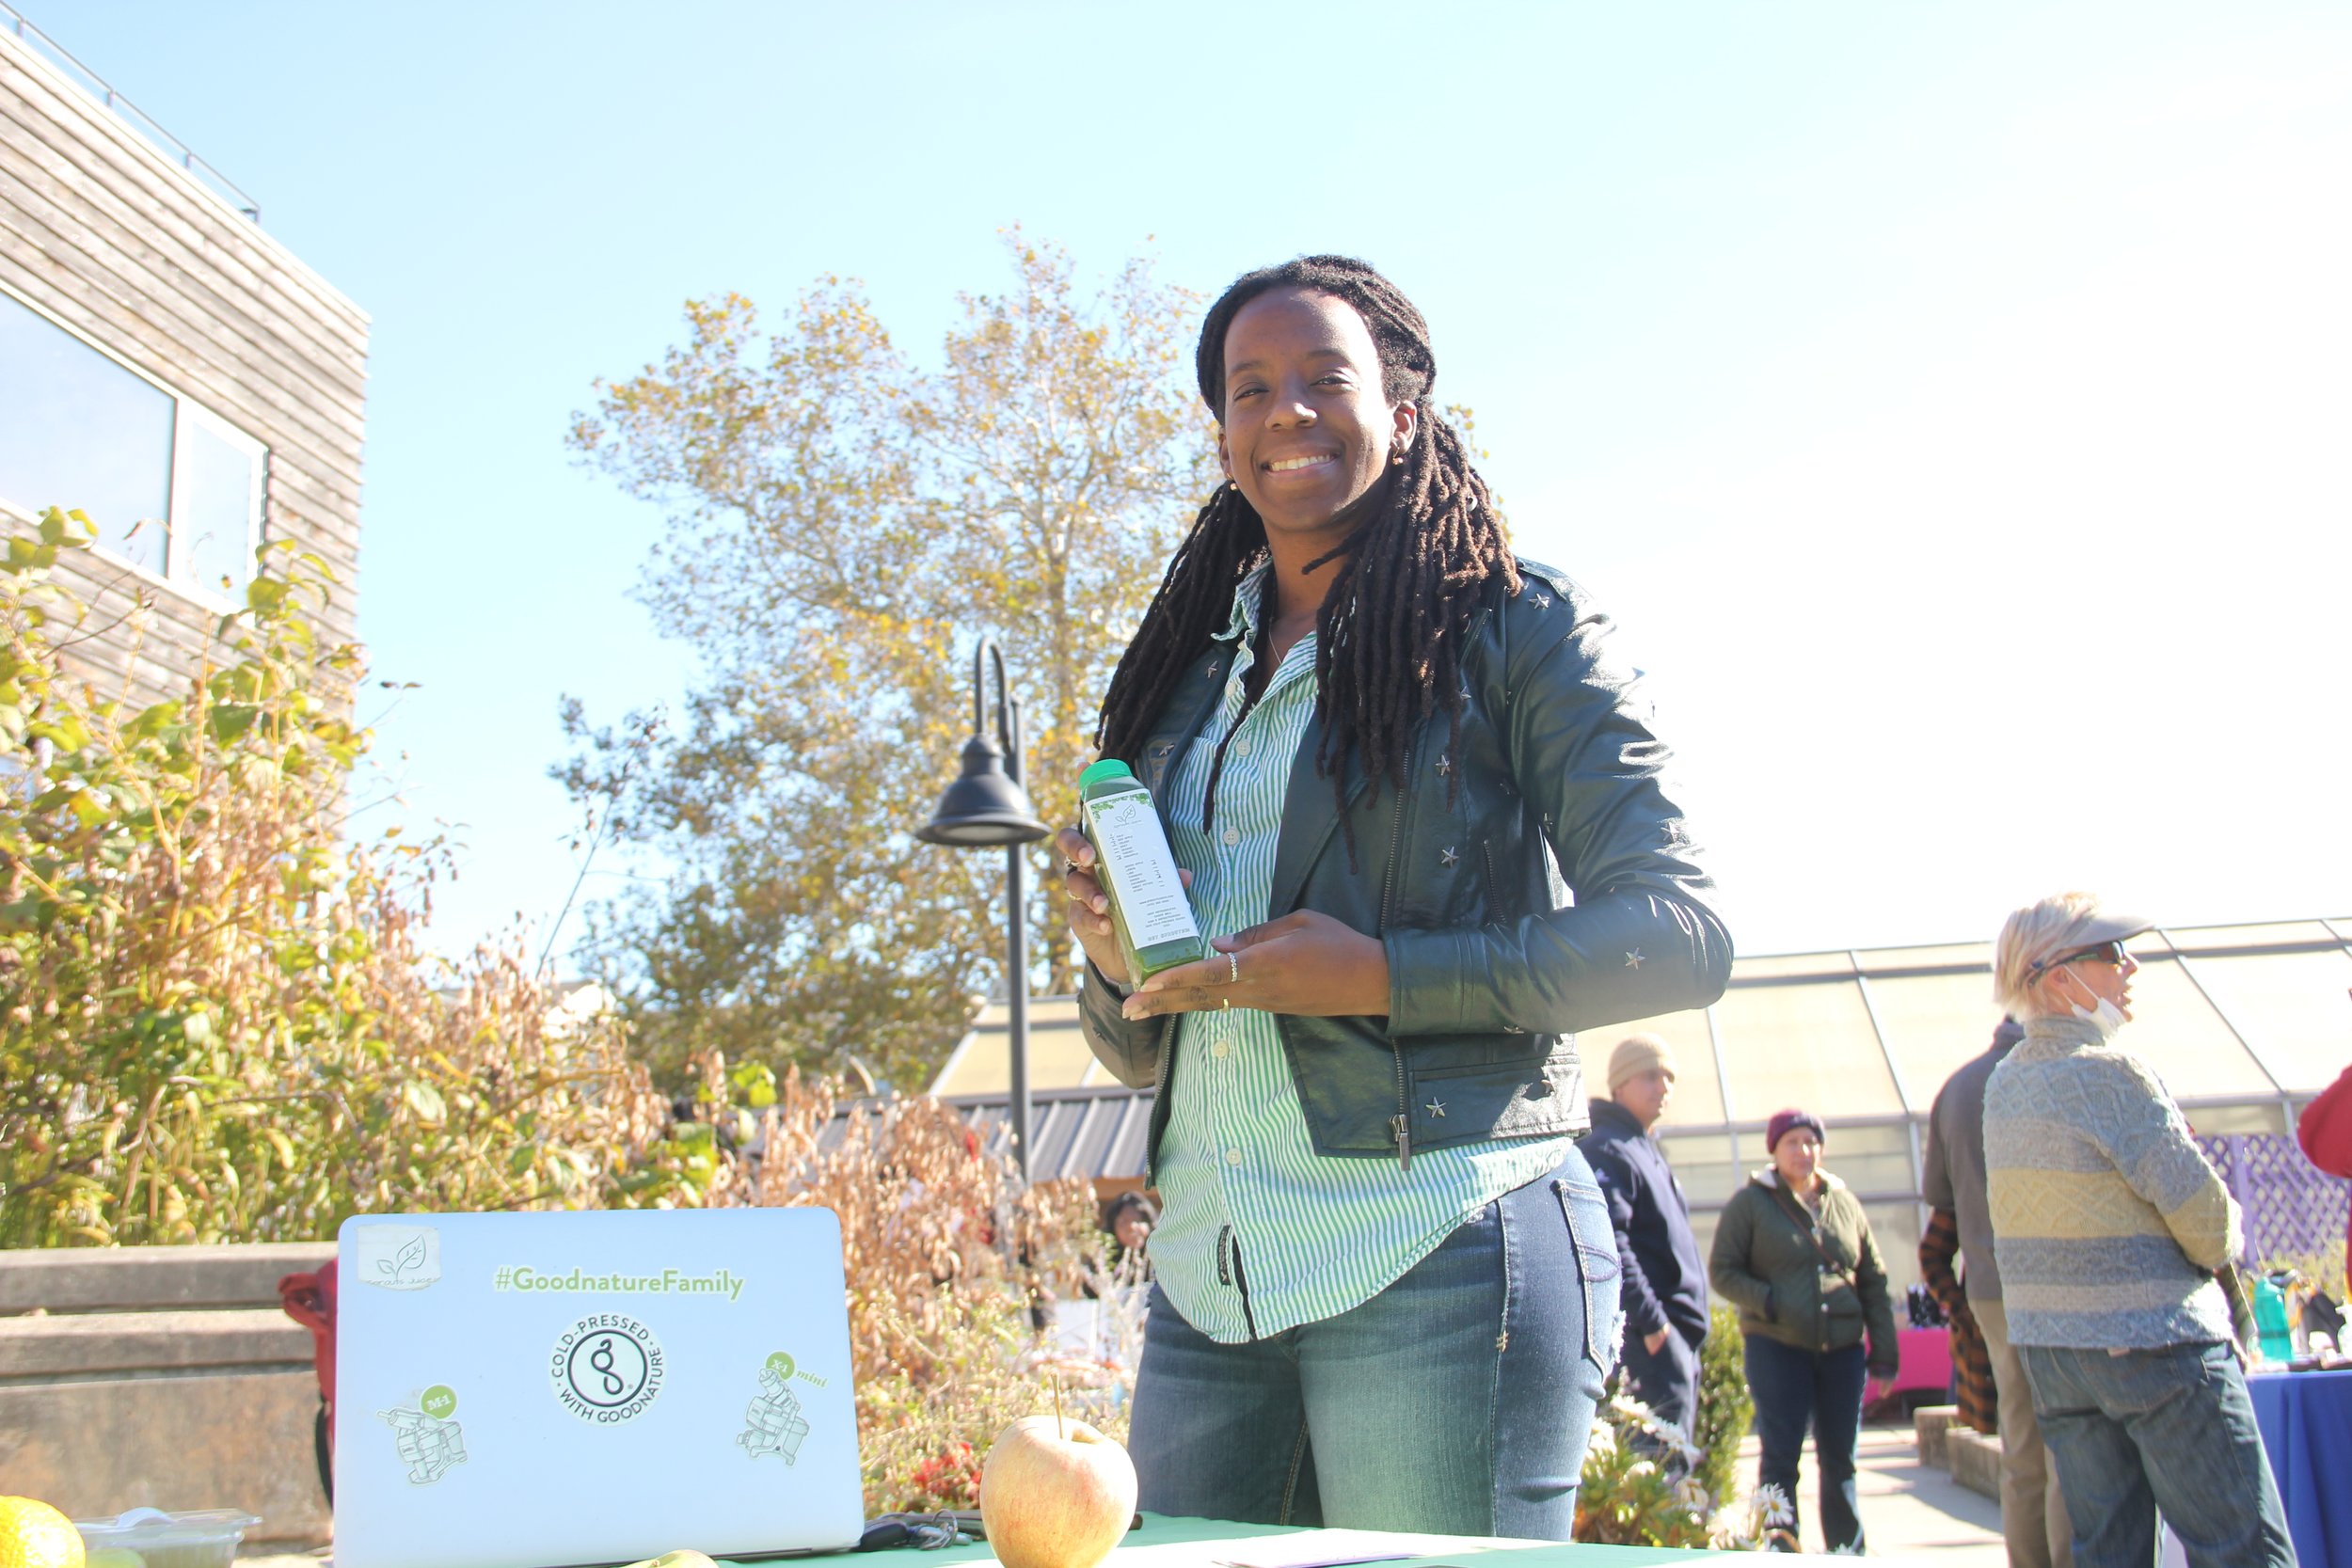 Courtney Adalah, owner of Sprouts Juice displaying one of her products, Newark, NJ, Nov. 6